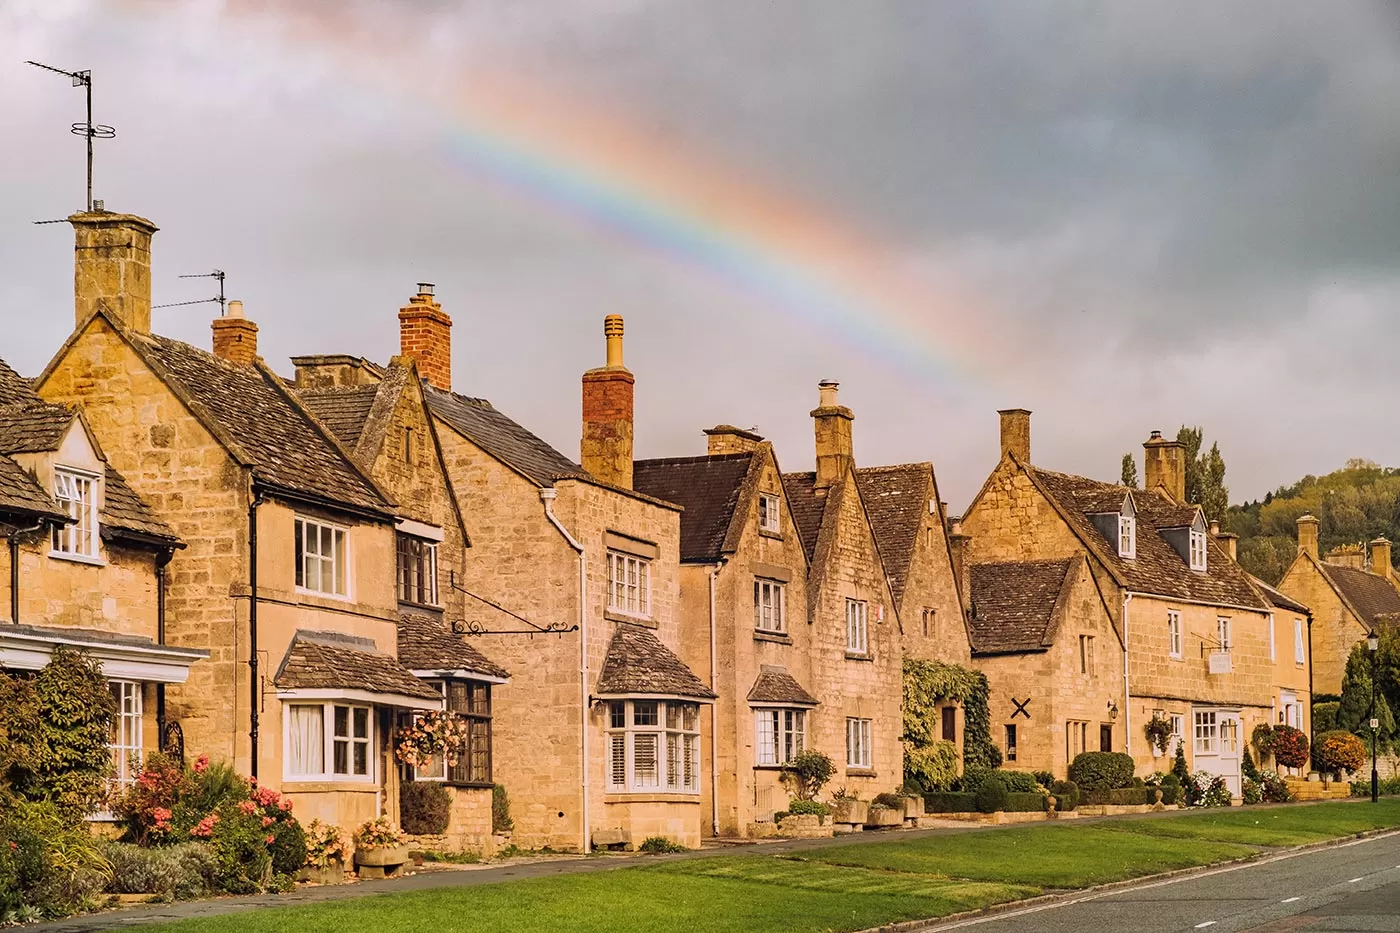 Best Things to Do in Broadway - The Cotswolds - Rainbows over pretty Jacobean homes on Upper High Street